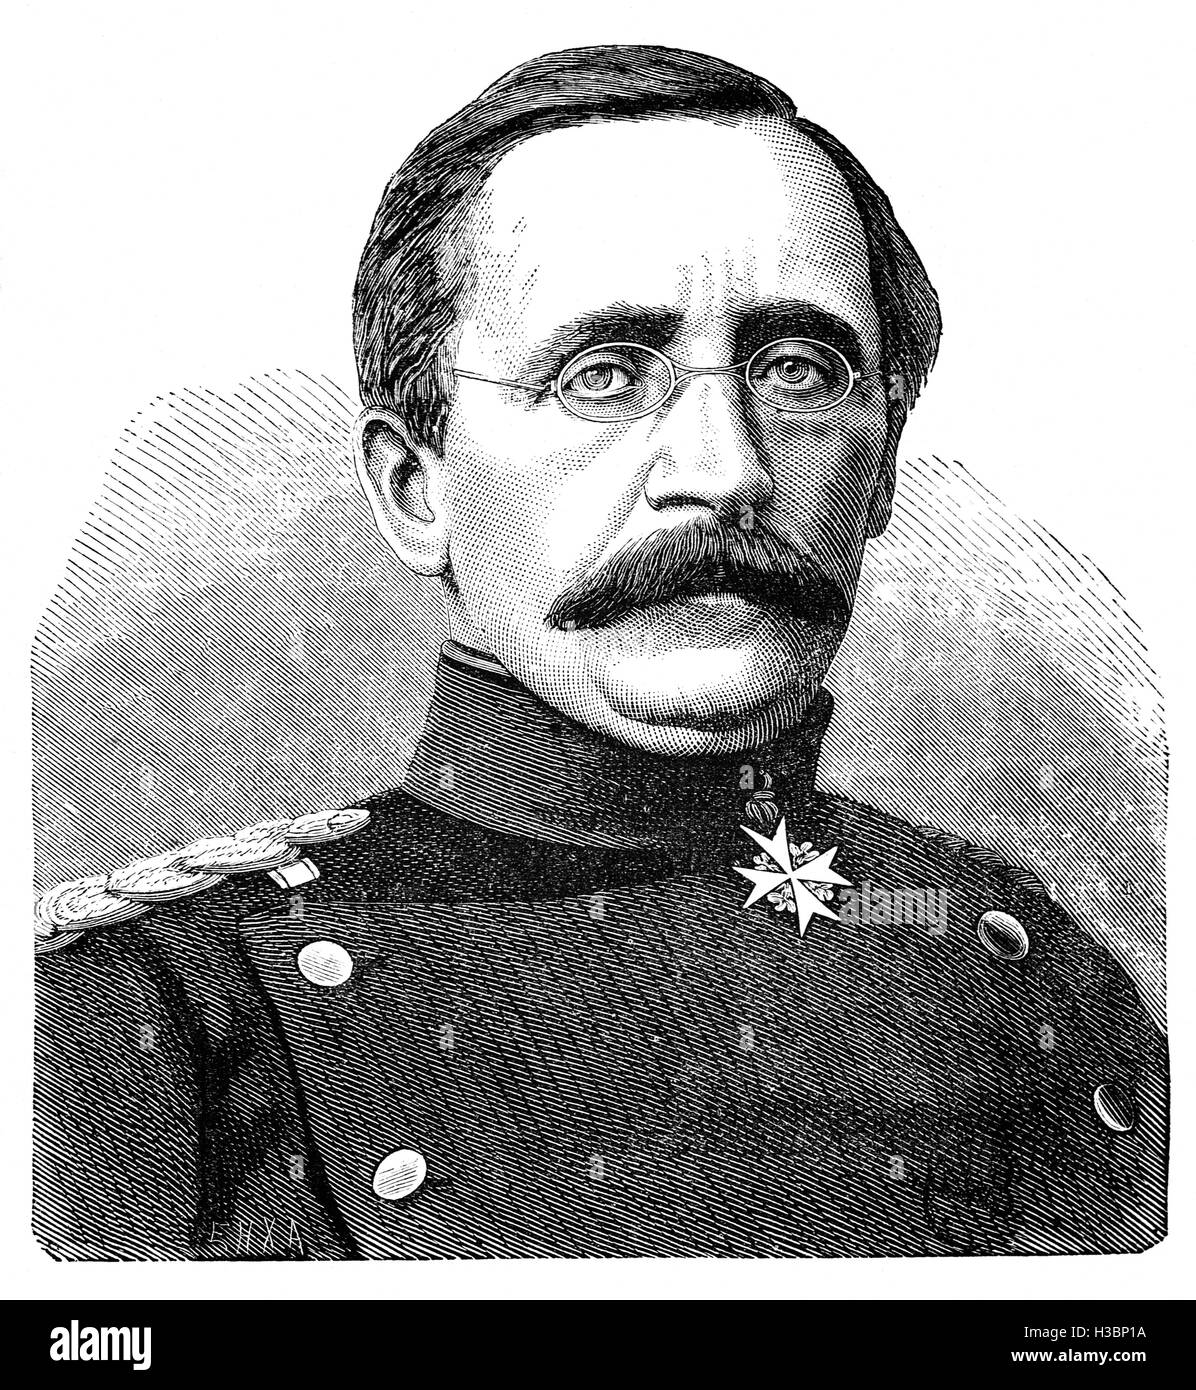 August Karl von Goeben (1816 – 1880), a Prussian infantry general, won the Iron Cross for his service in the Franco-Prussian War of 1870-1871.  It was his leadership that contributed mainly to the victory at the Spicheren on 6 August, and von Goeben won the only laurels gained on the Prussian right wing at Gravelotte on 18 August. Stock Photo